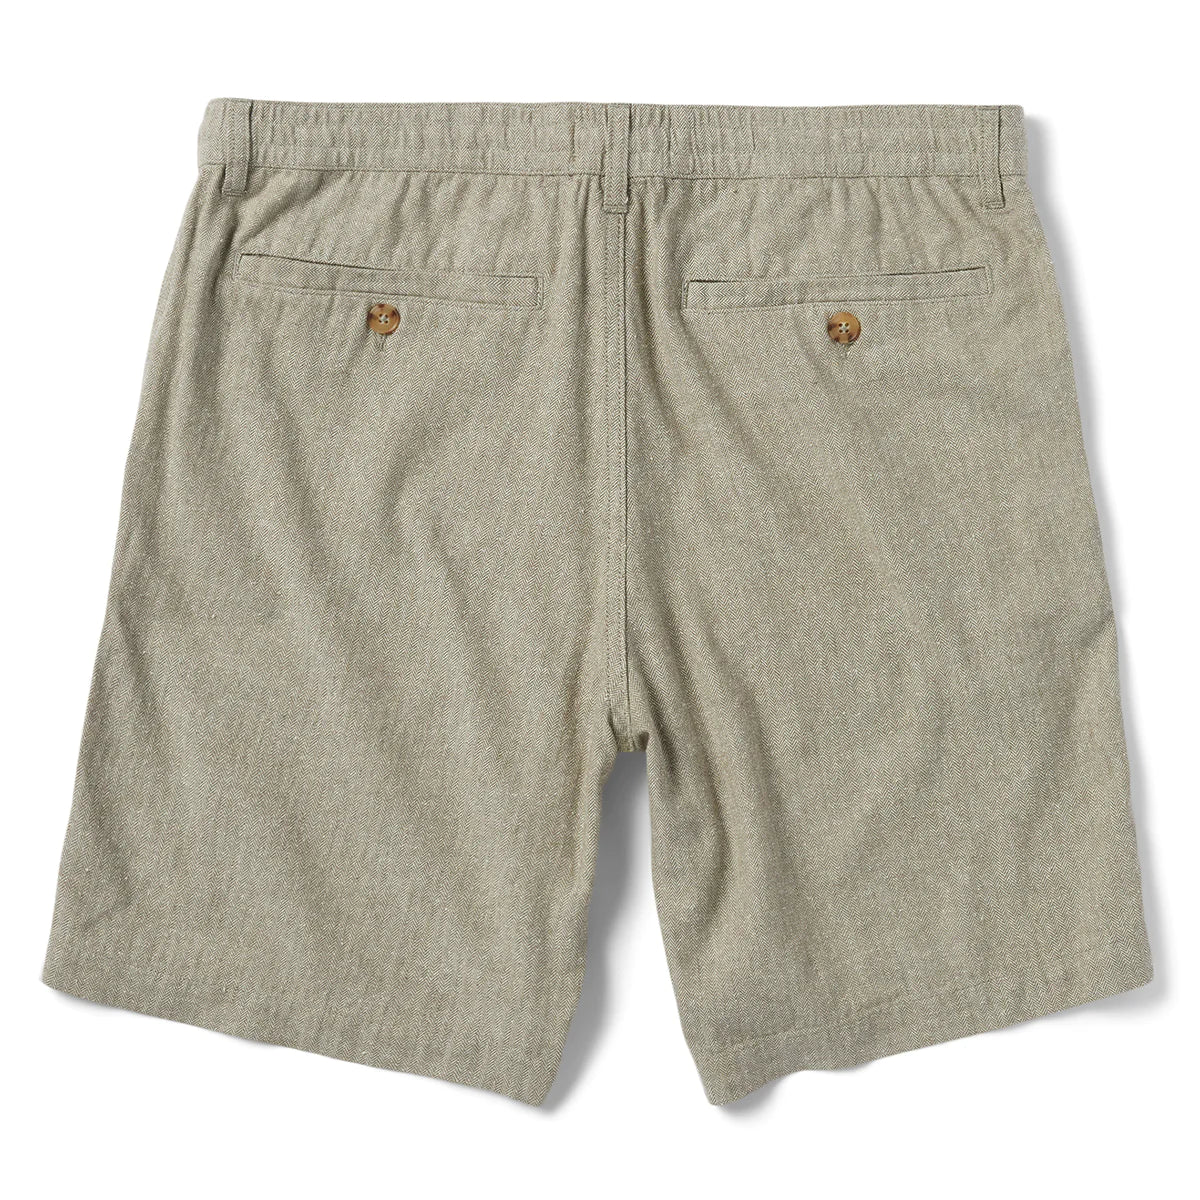 Taylor Stitch - TAYLOR STITCH EASY SHORT IN OLIVE HERRINGBONE - Rent With Thred